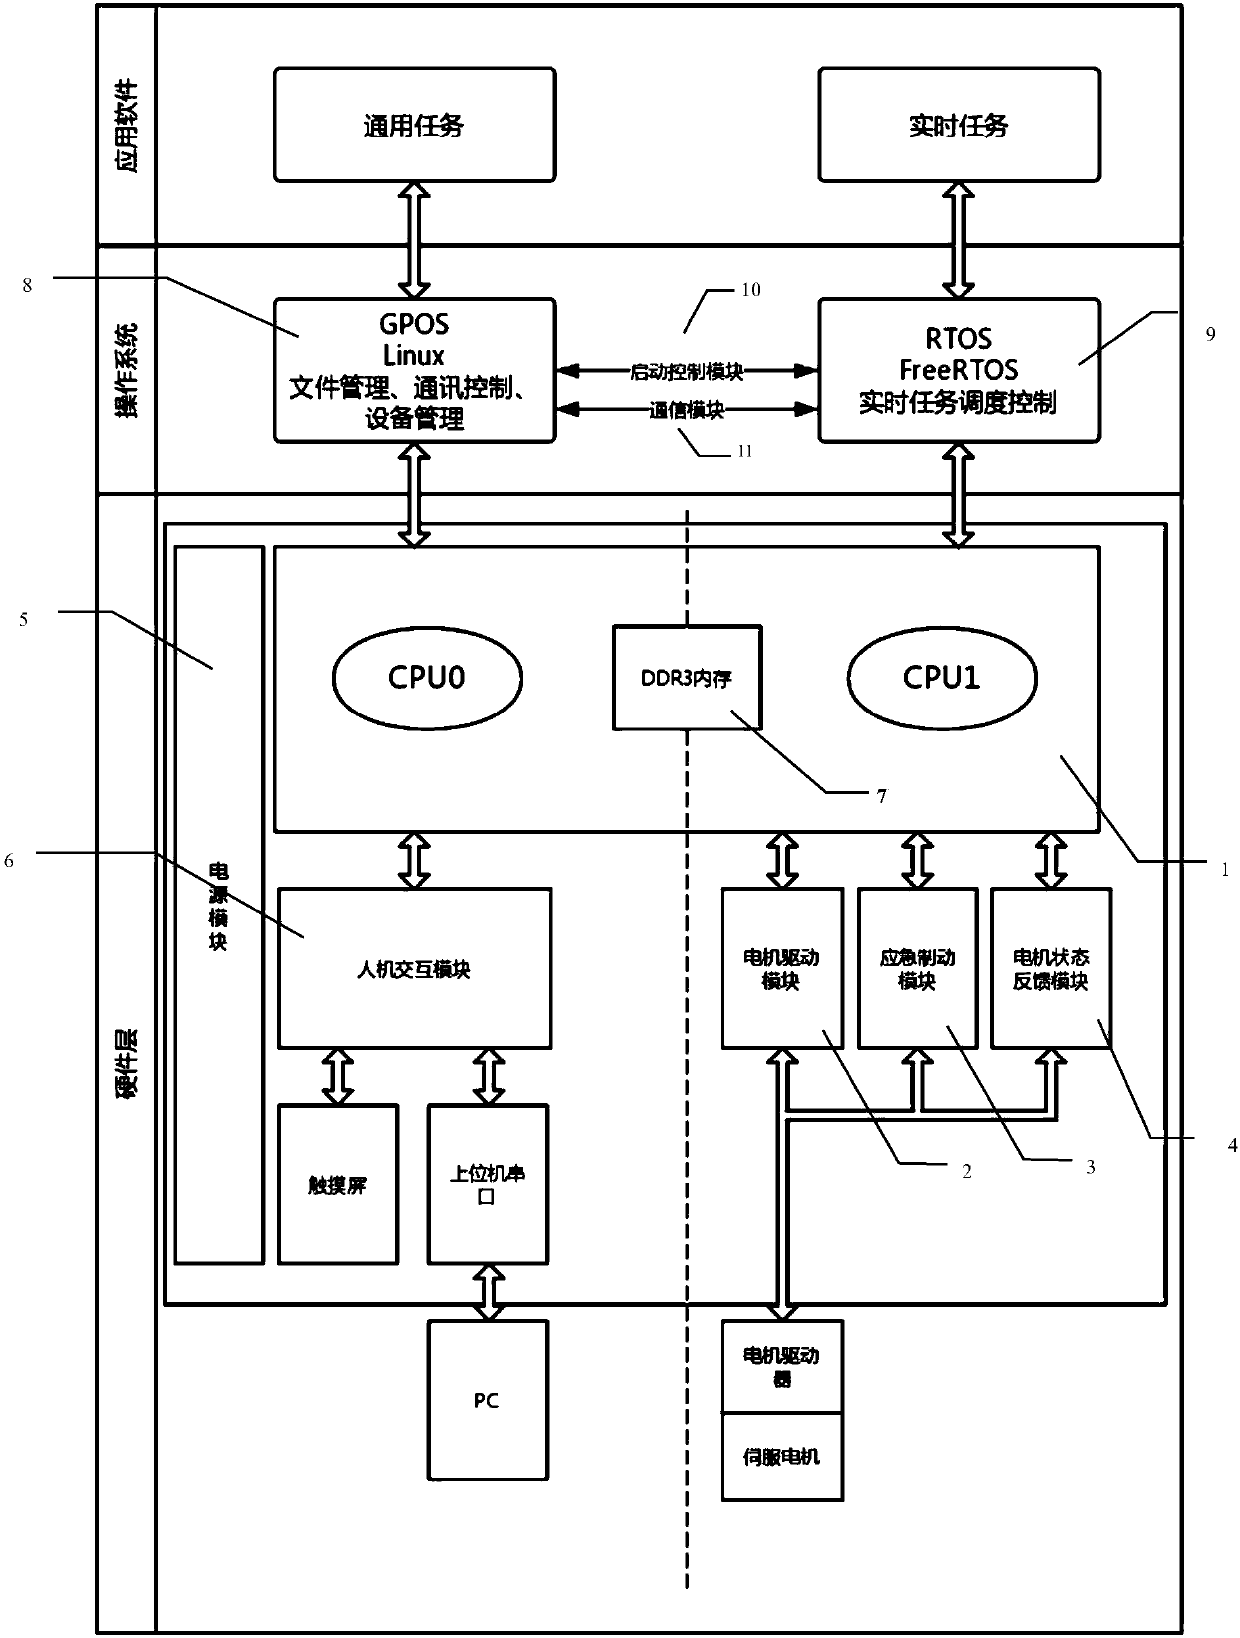 An RTOS-GPOS dual-operation system robot controller based on a ZYNQ dual-core processor